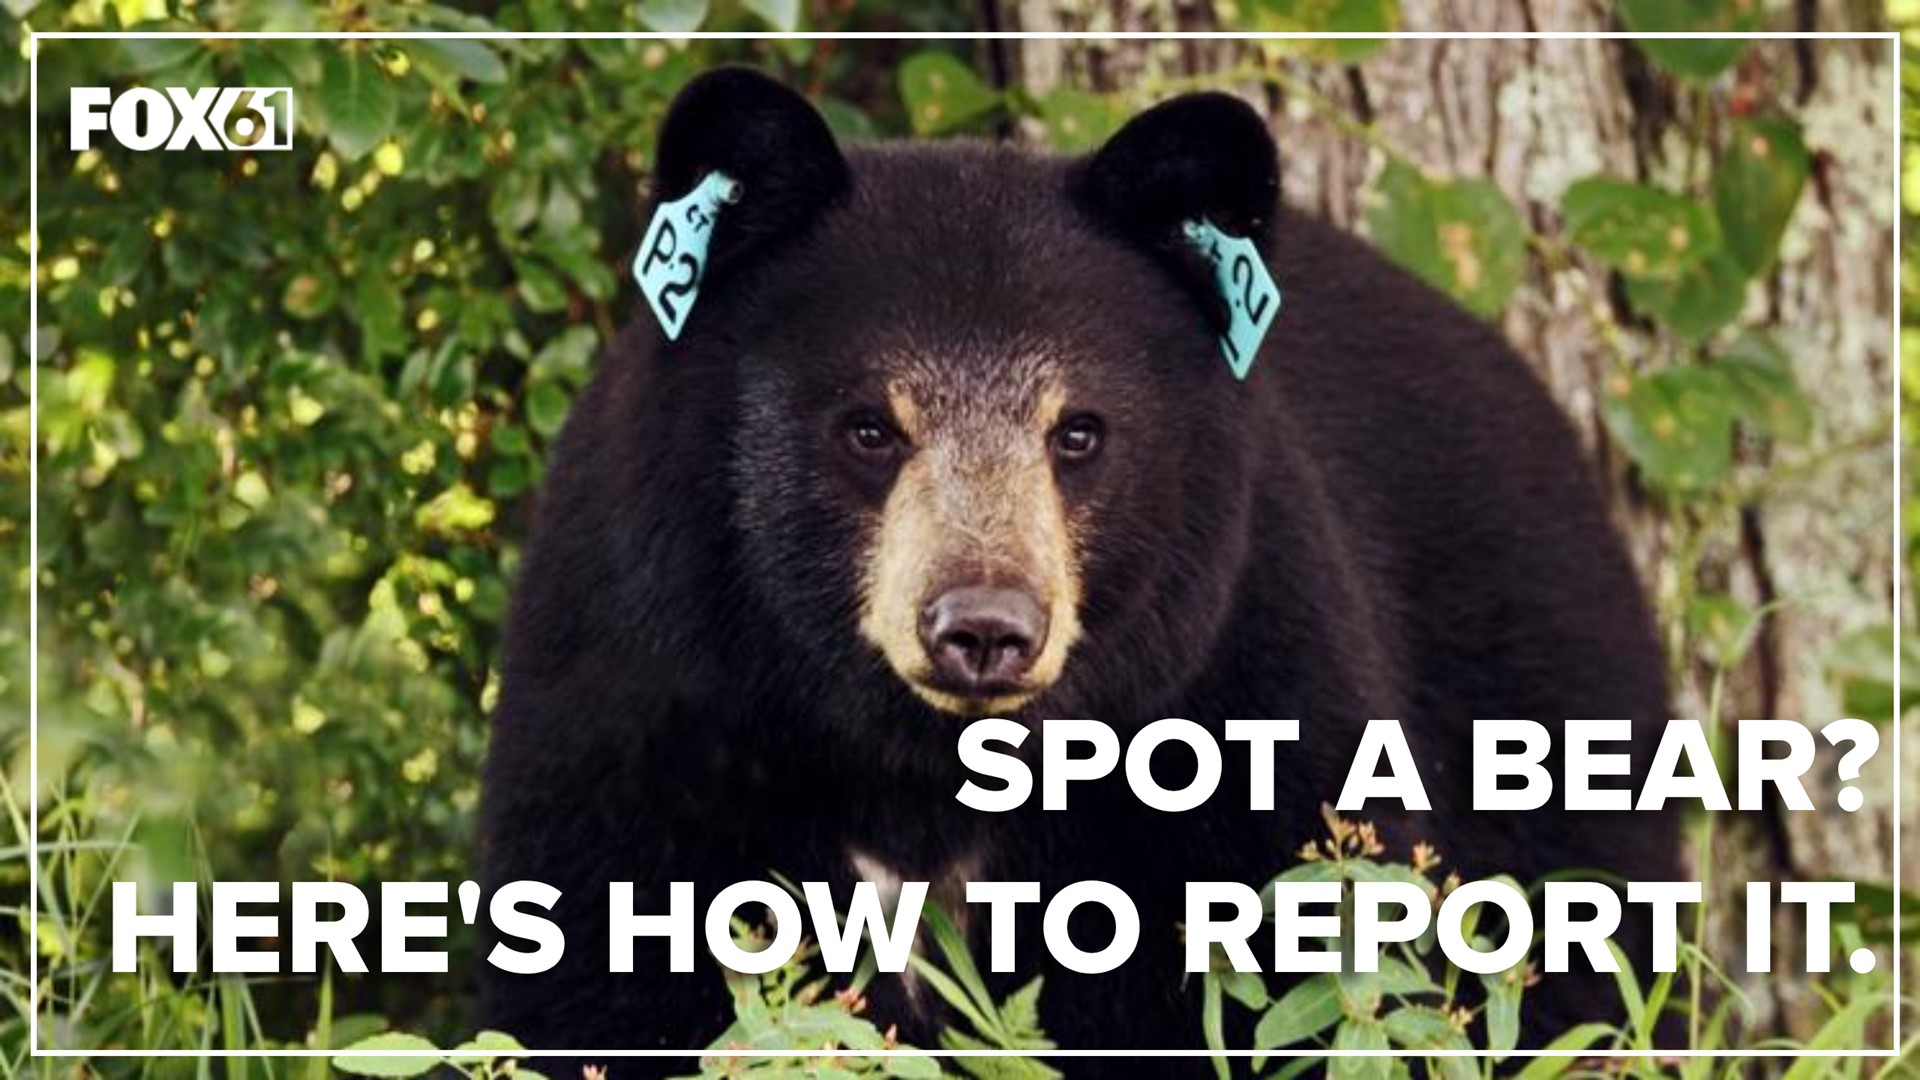 More than 3,500 bear sightings were reported across the state.